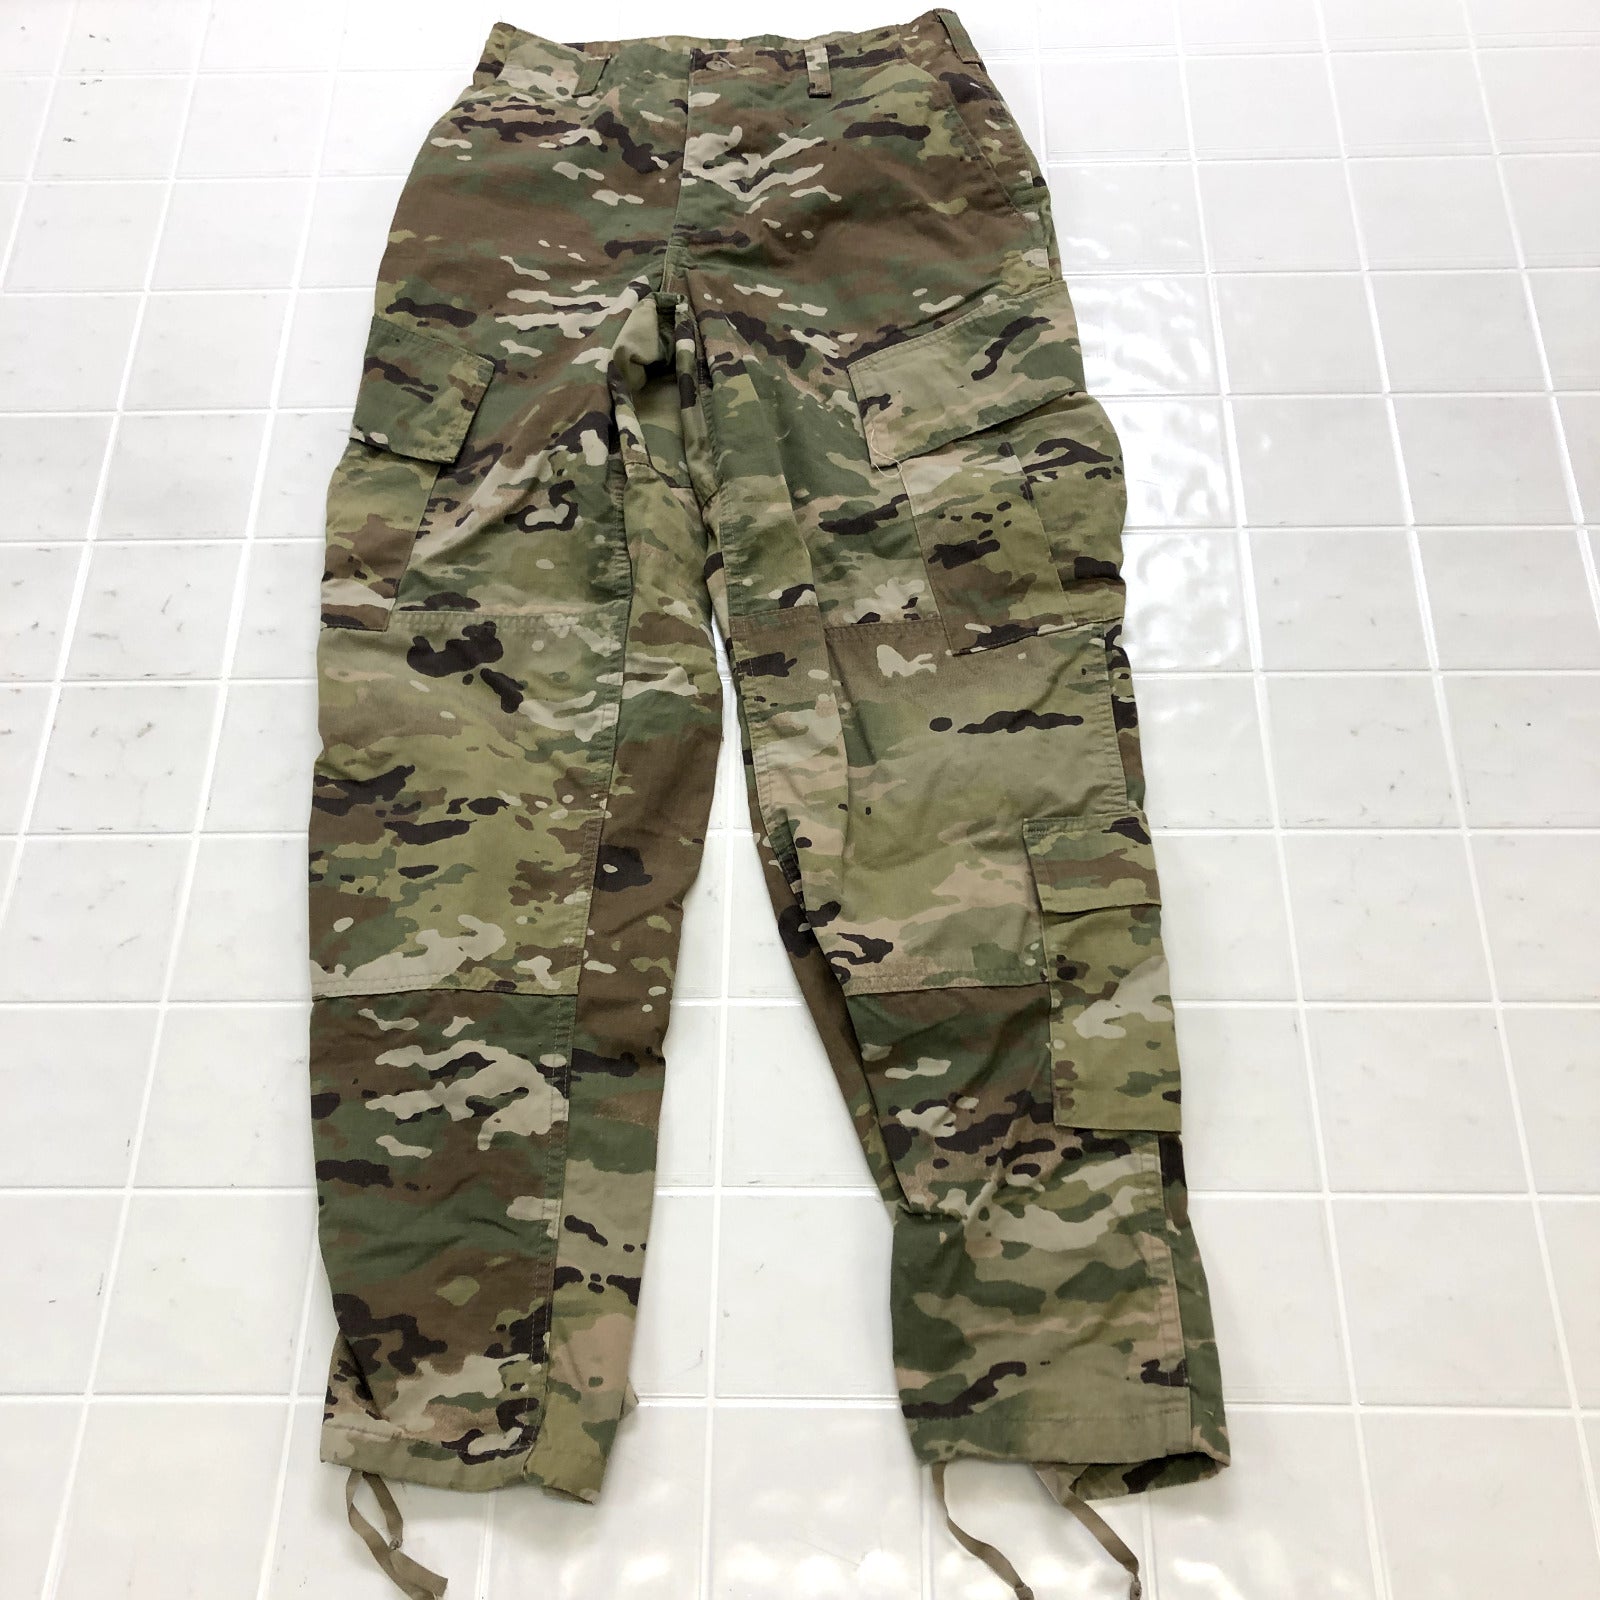 Vintage Green Camouflage Cargo Regular Flat Front Military Pants Adult Size S